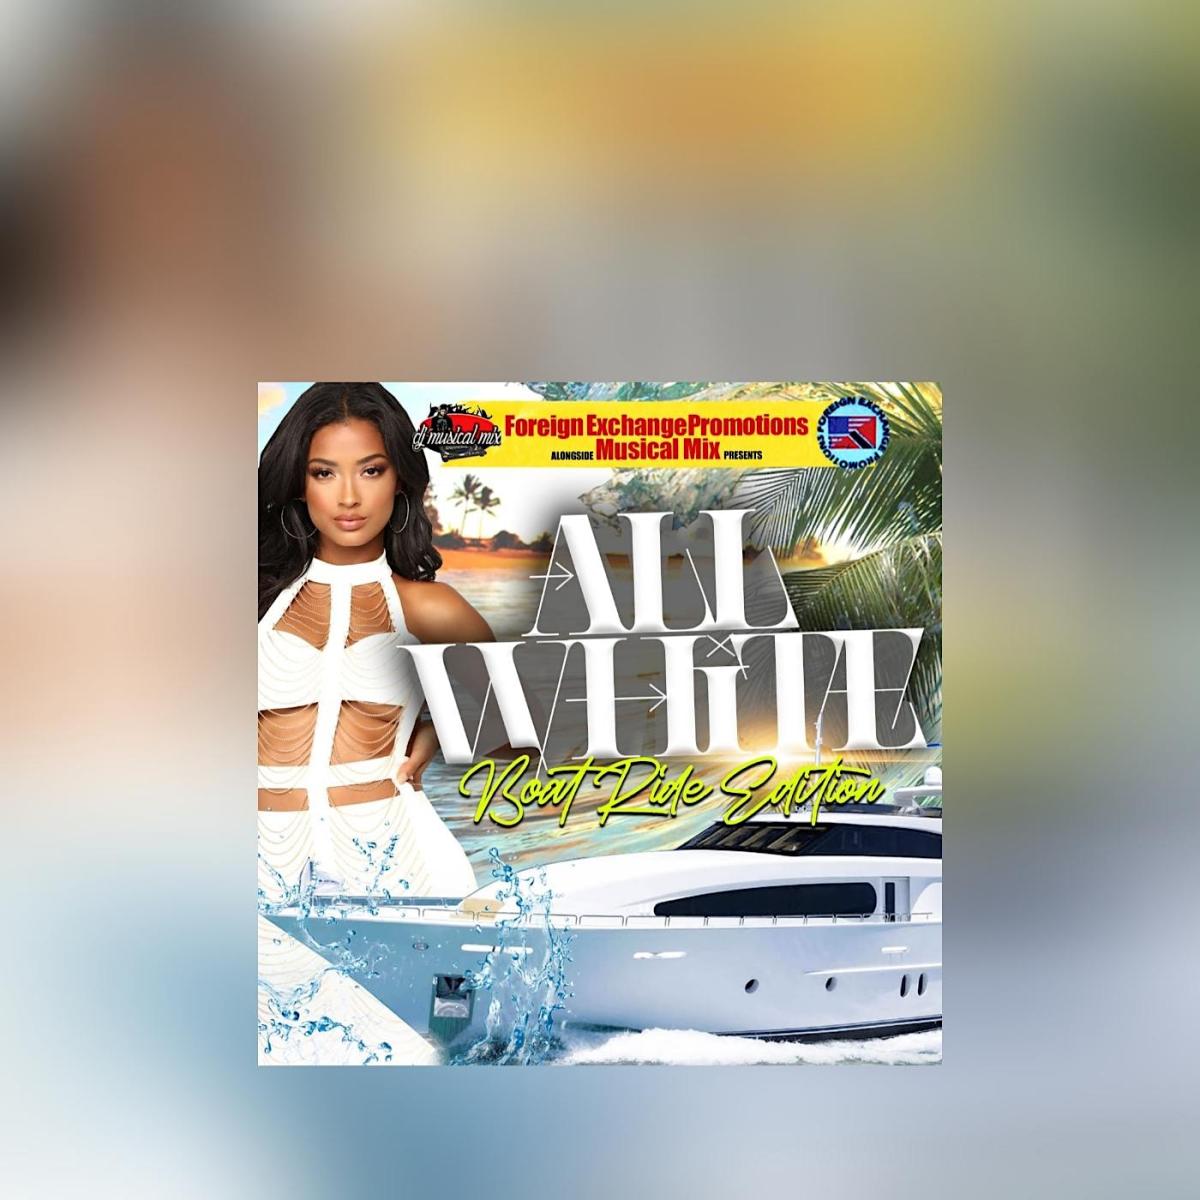 White & Anything Cooler  Boatride flyer or graphic.